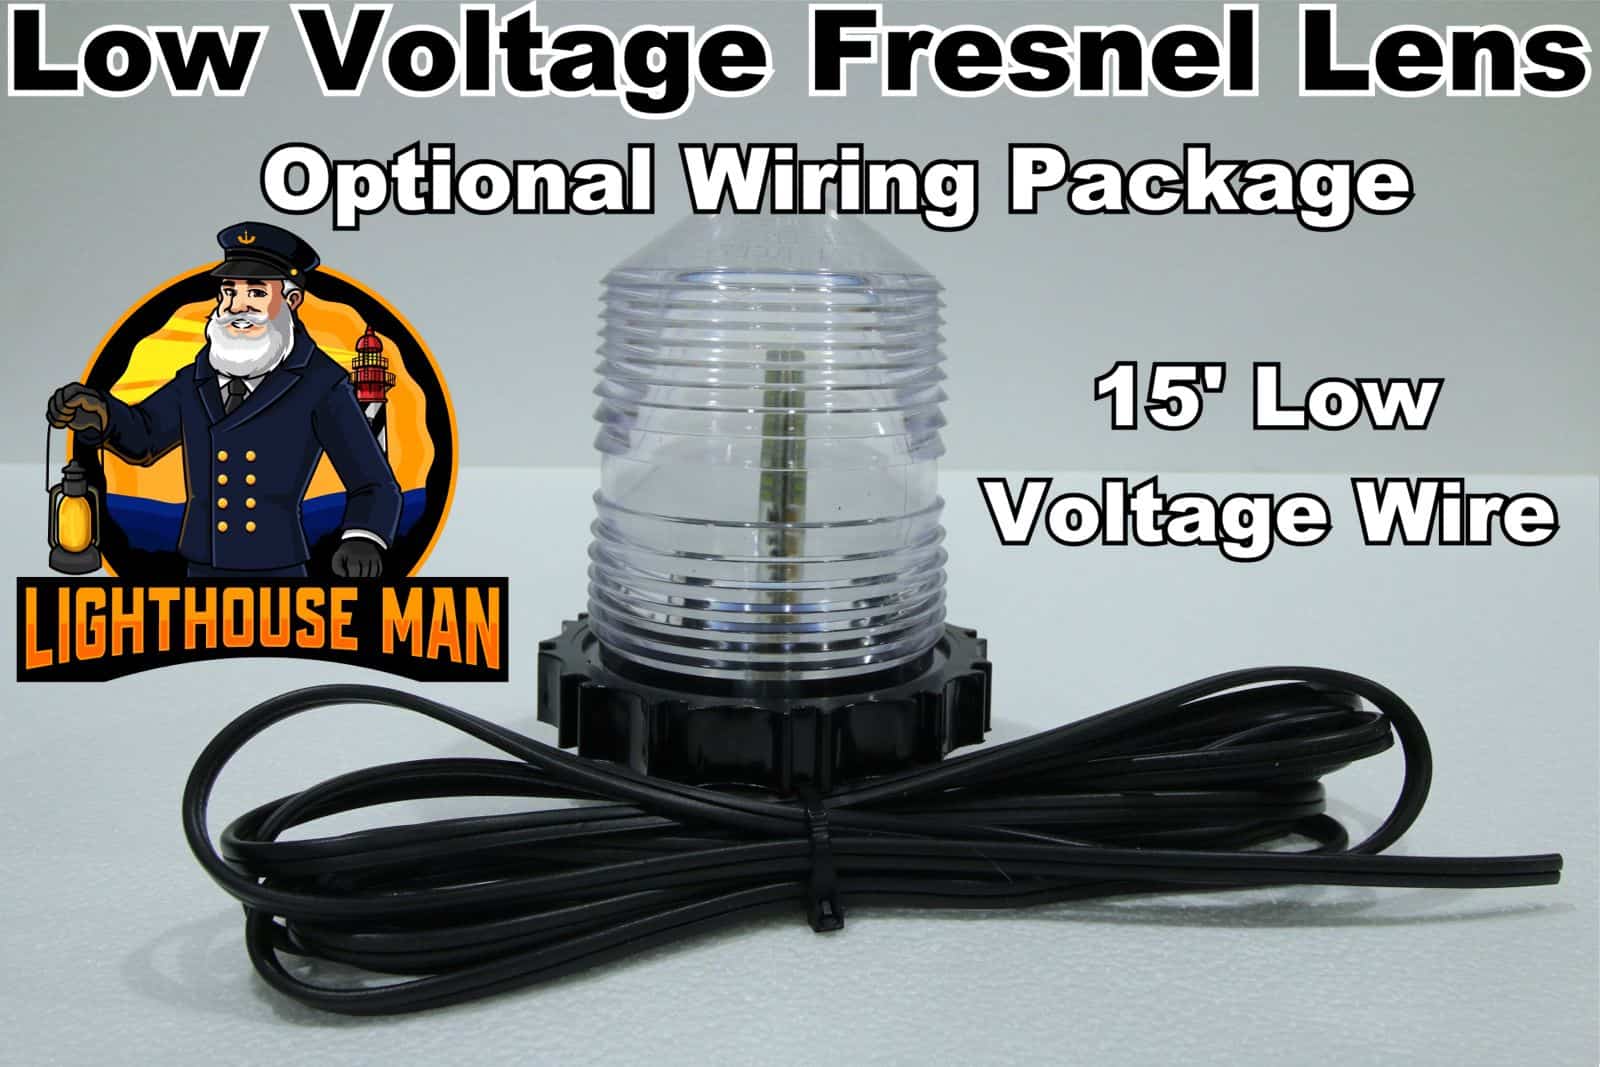 Low Voltage Fresnel Lens Wiring Package